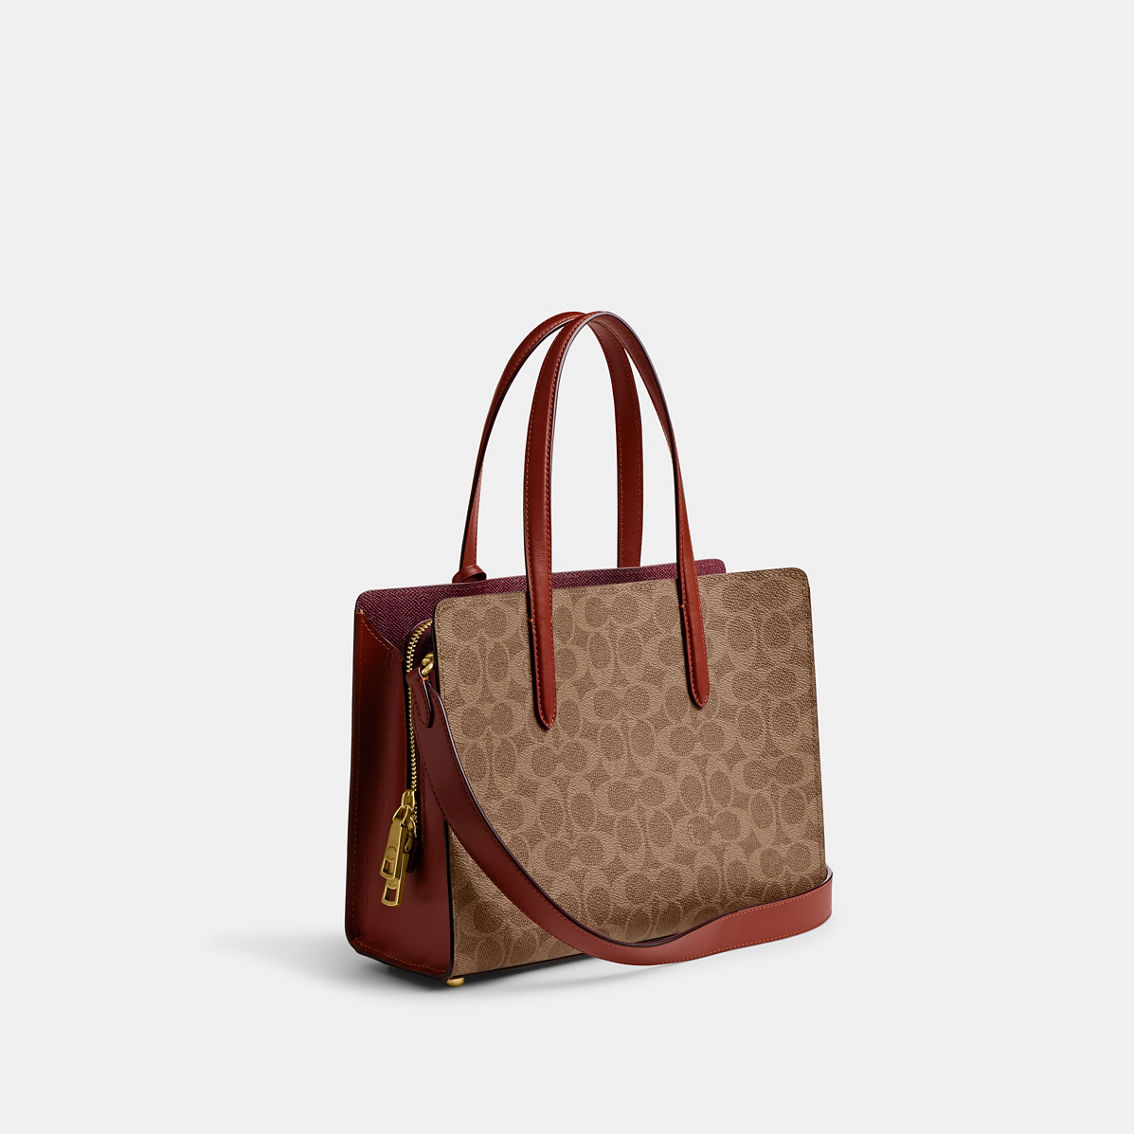 Coach Coated Canvas Signature Carter Carryall - Image 3 of 5